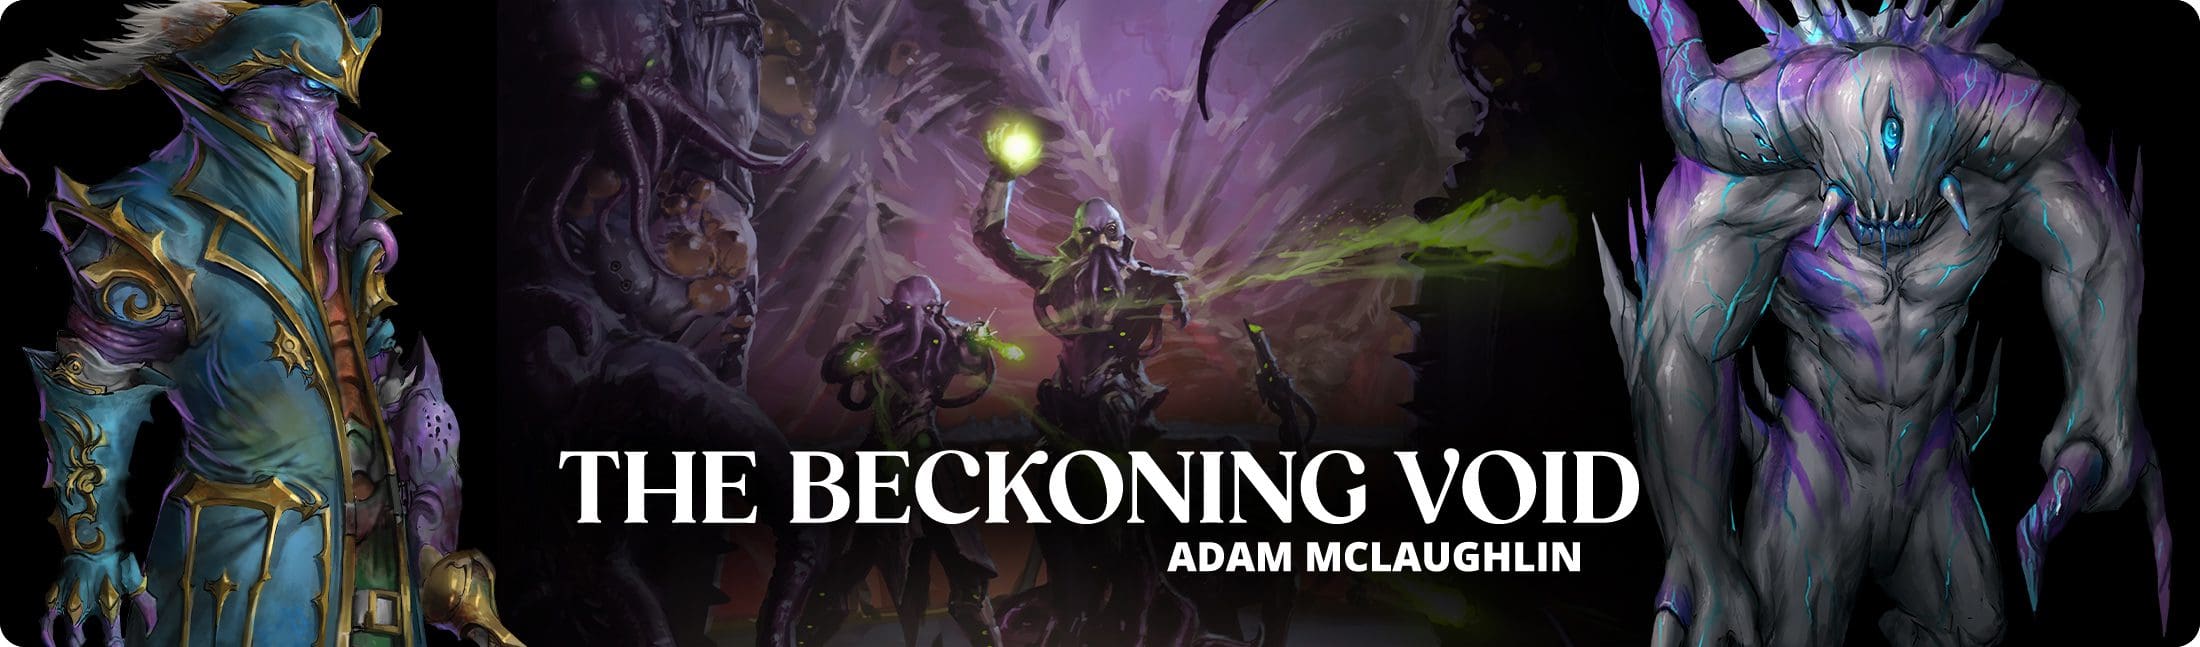 The Beckoning Void